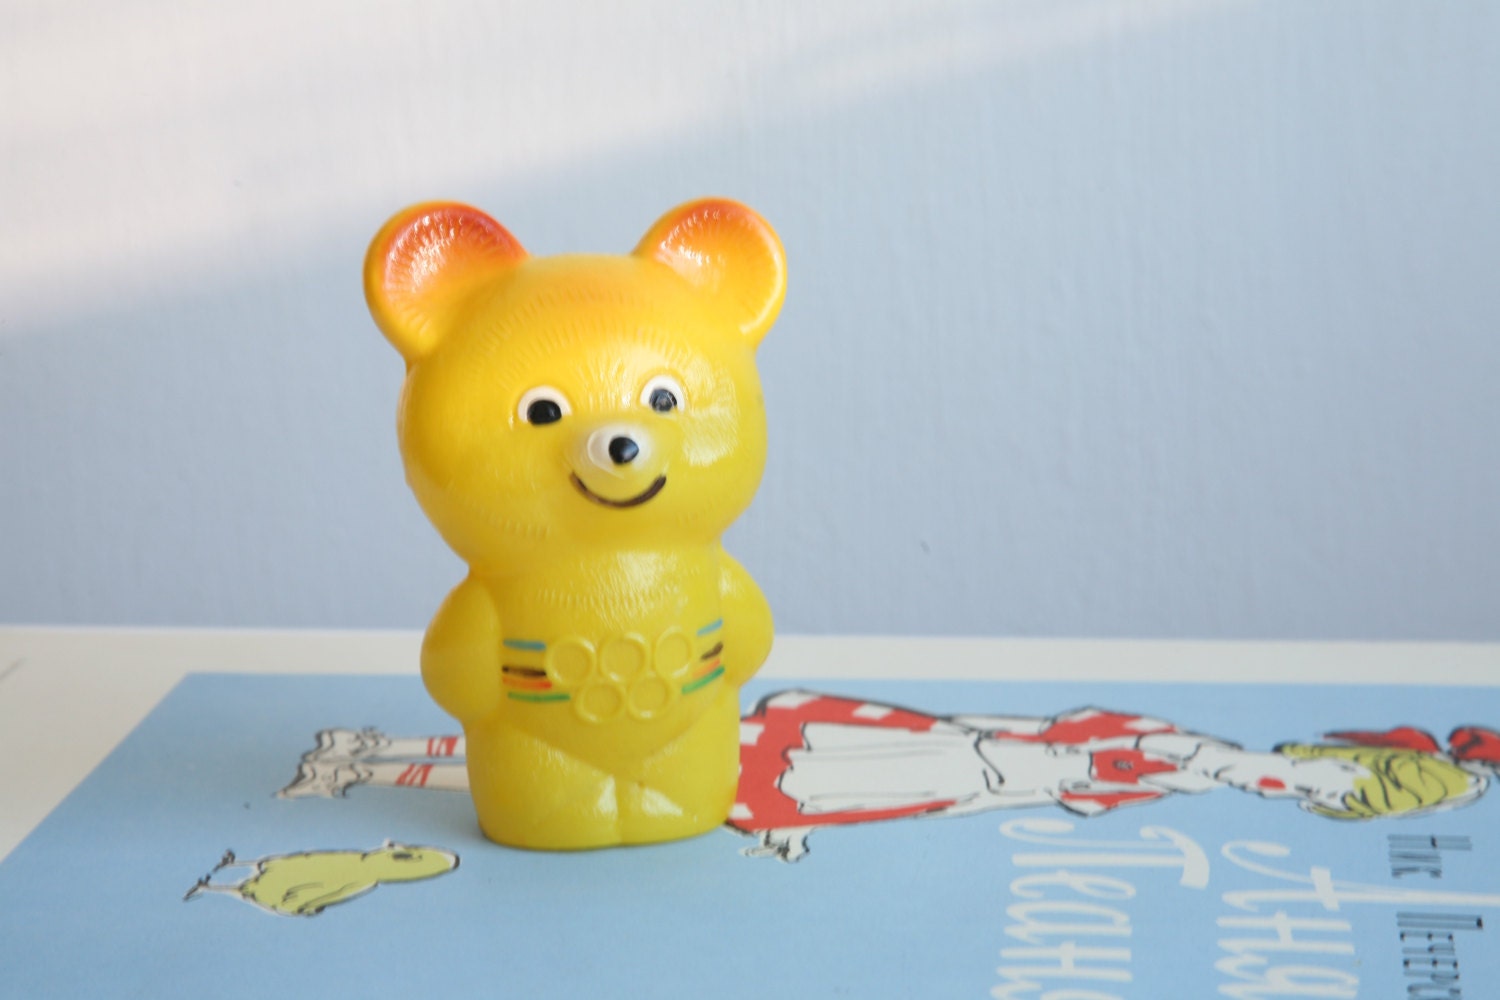 Vintage Russian Yellow Celluloid Moscow Olympic Games Mascot Bear Misha Rattle - TwoRedSuitcases